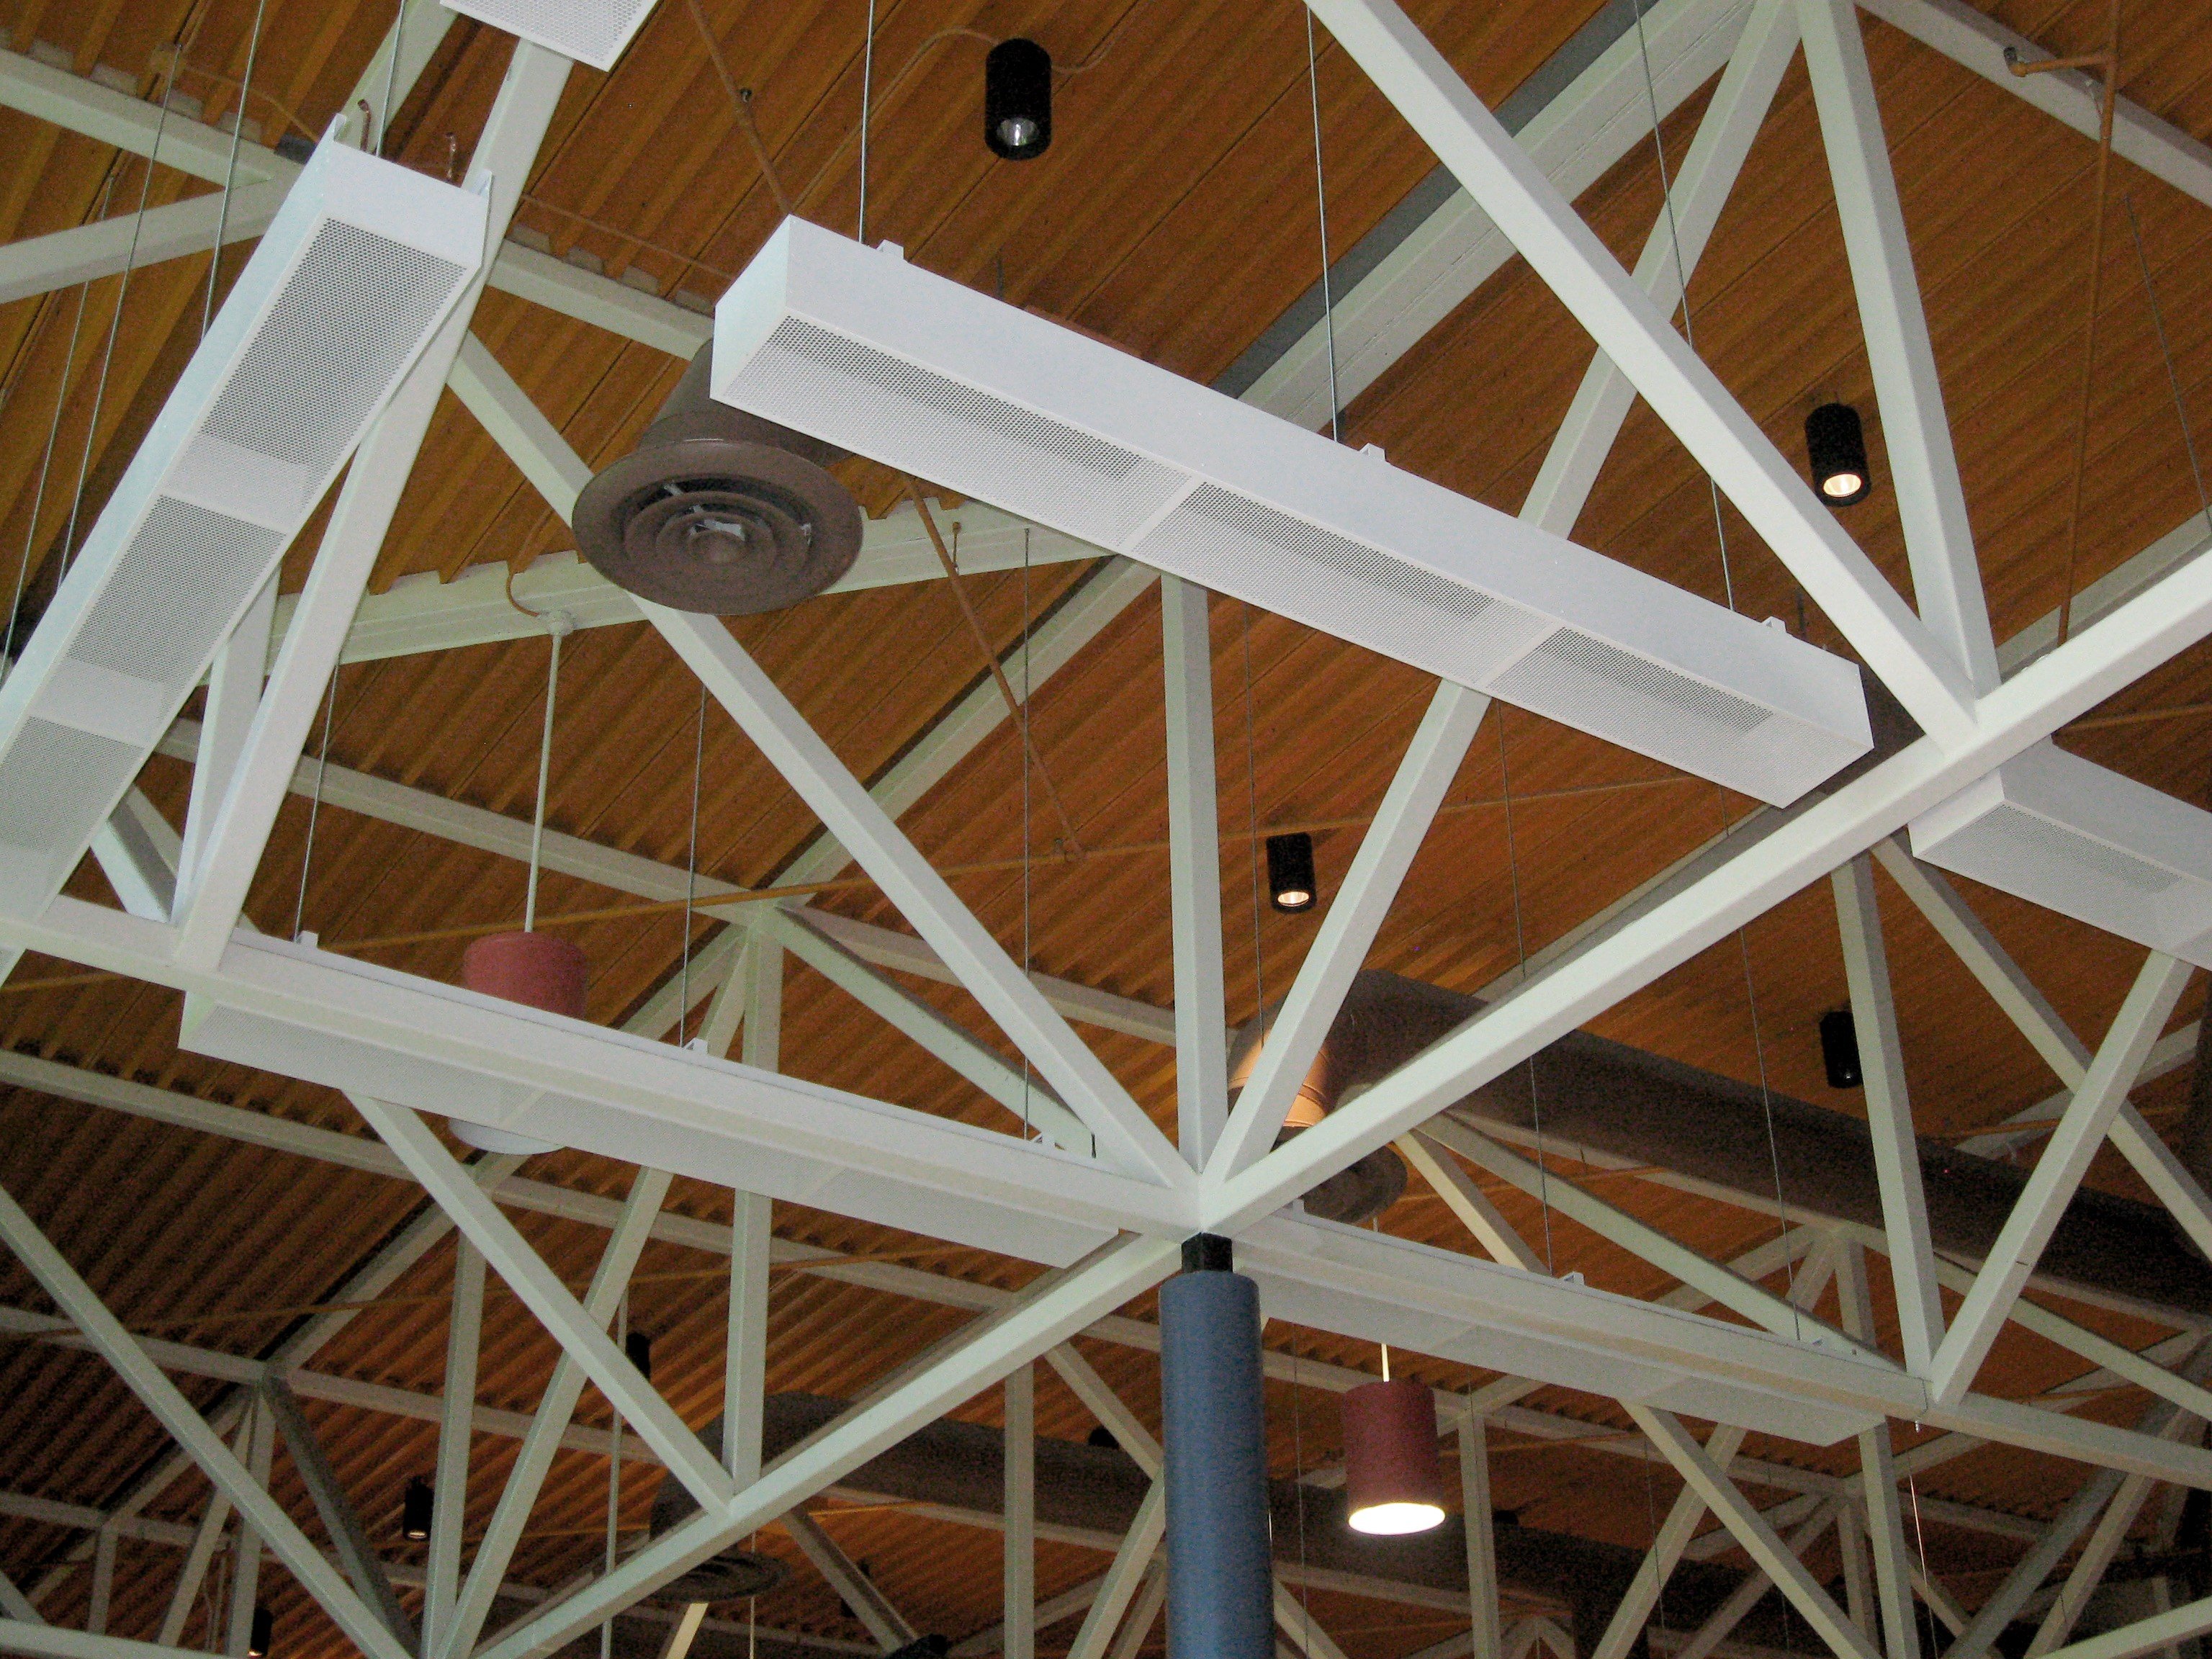 Passive beams installed in an open ceiling